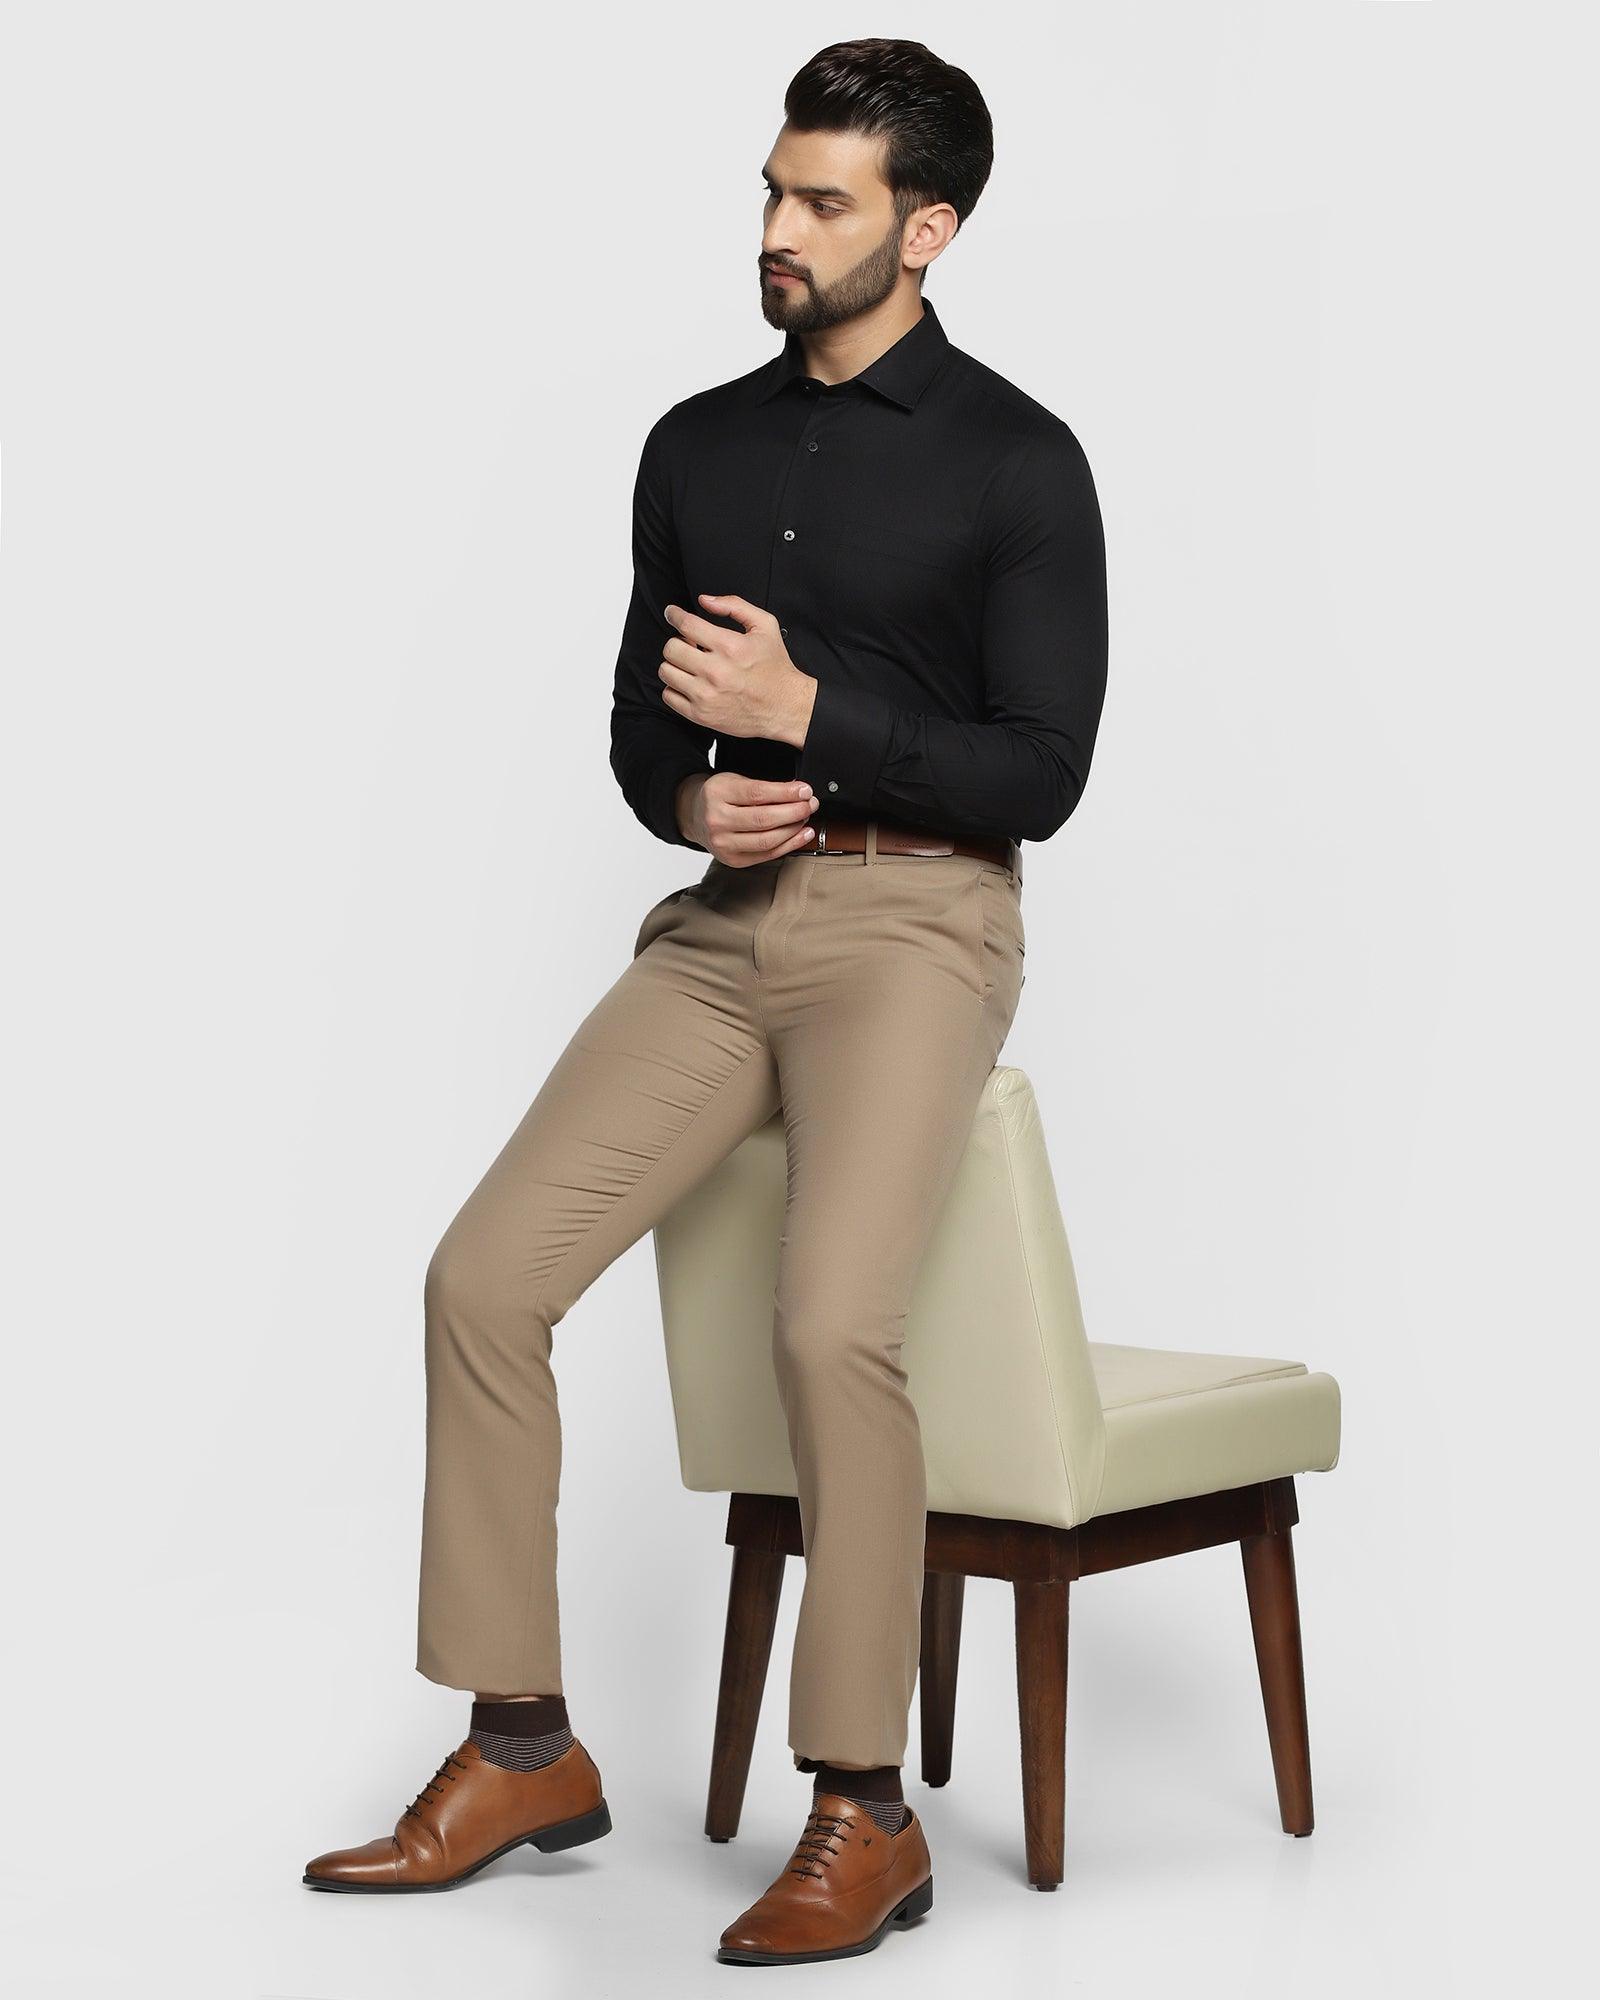 Washable Workwear Wednesday: The Smith Pant in Wool Twill - CorporetteMoms